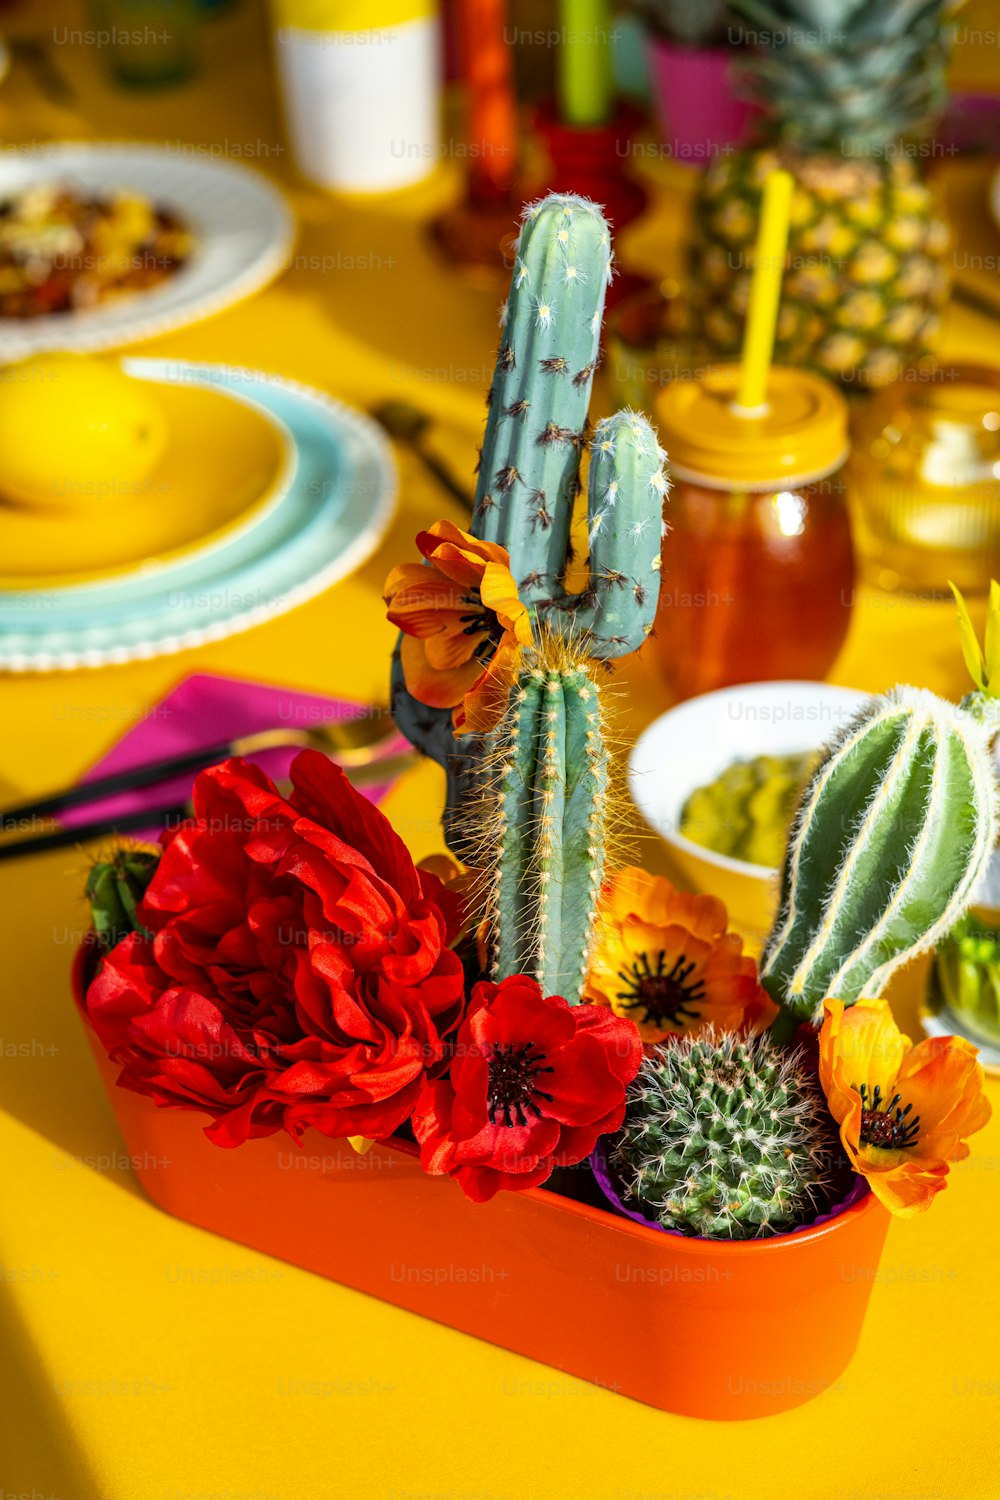 a table topped with a potted cactus next to a plate of food